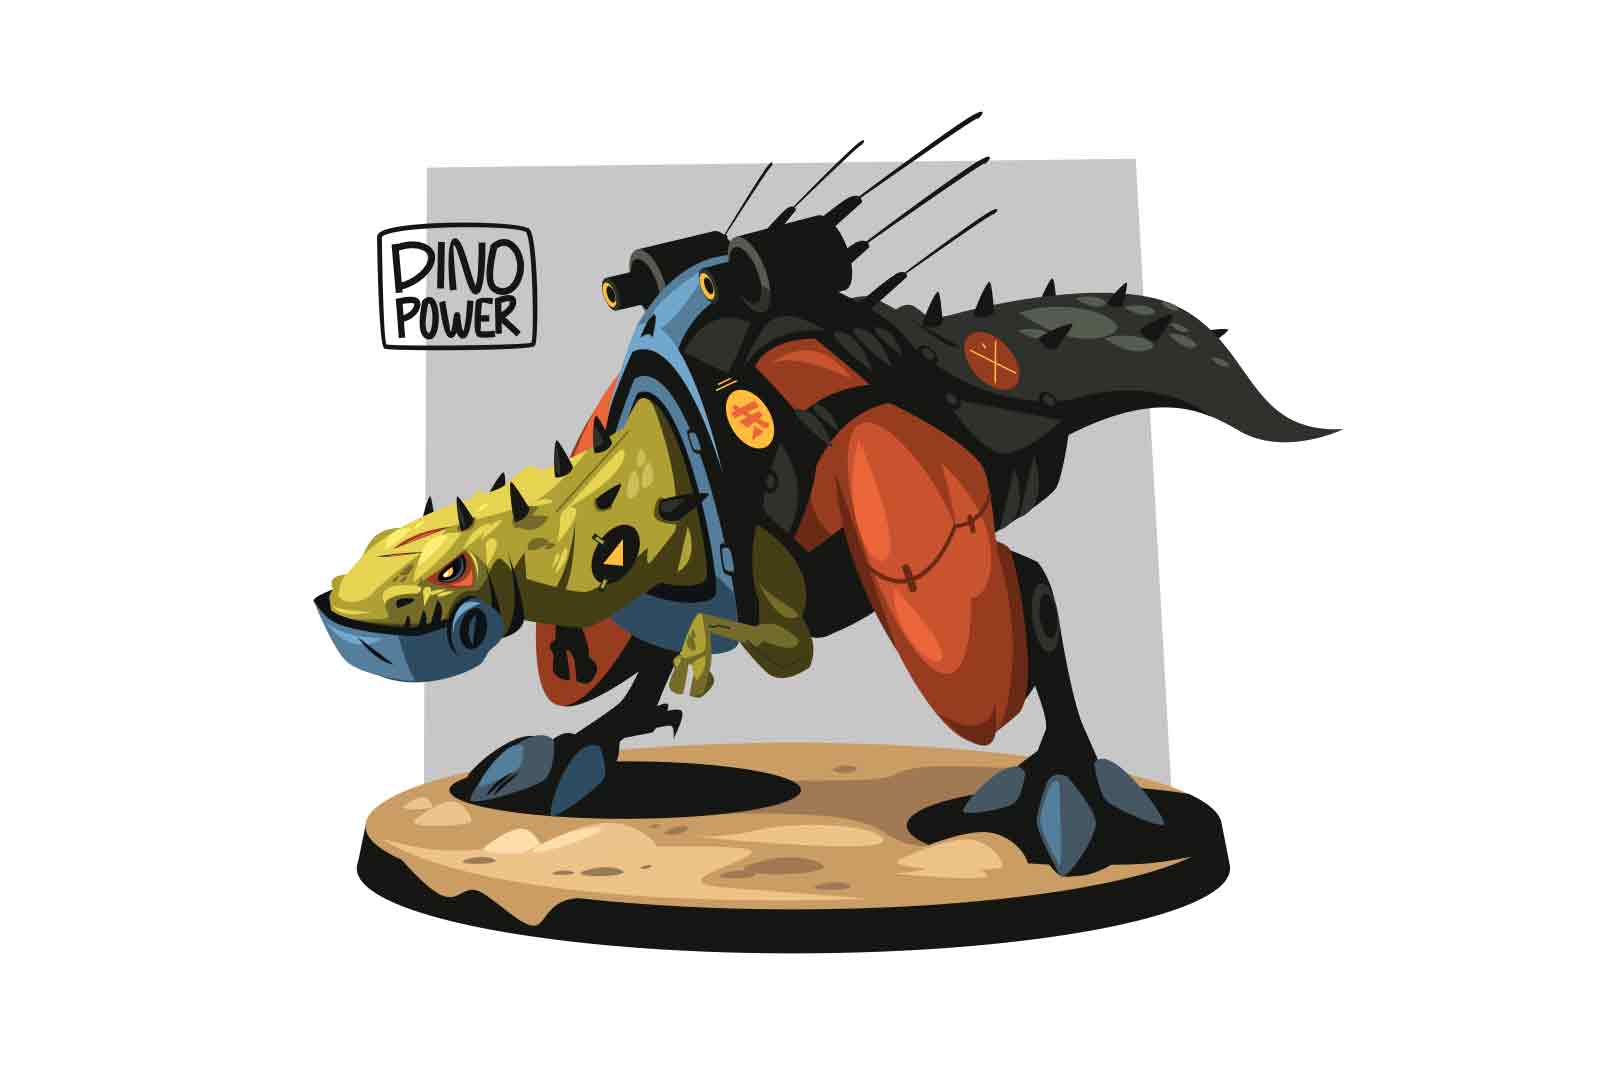 A robot dinosaur with a weapon stands in an aggressive stance, vector illustration